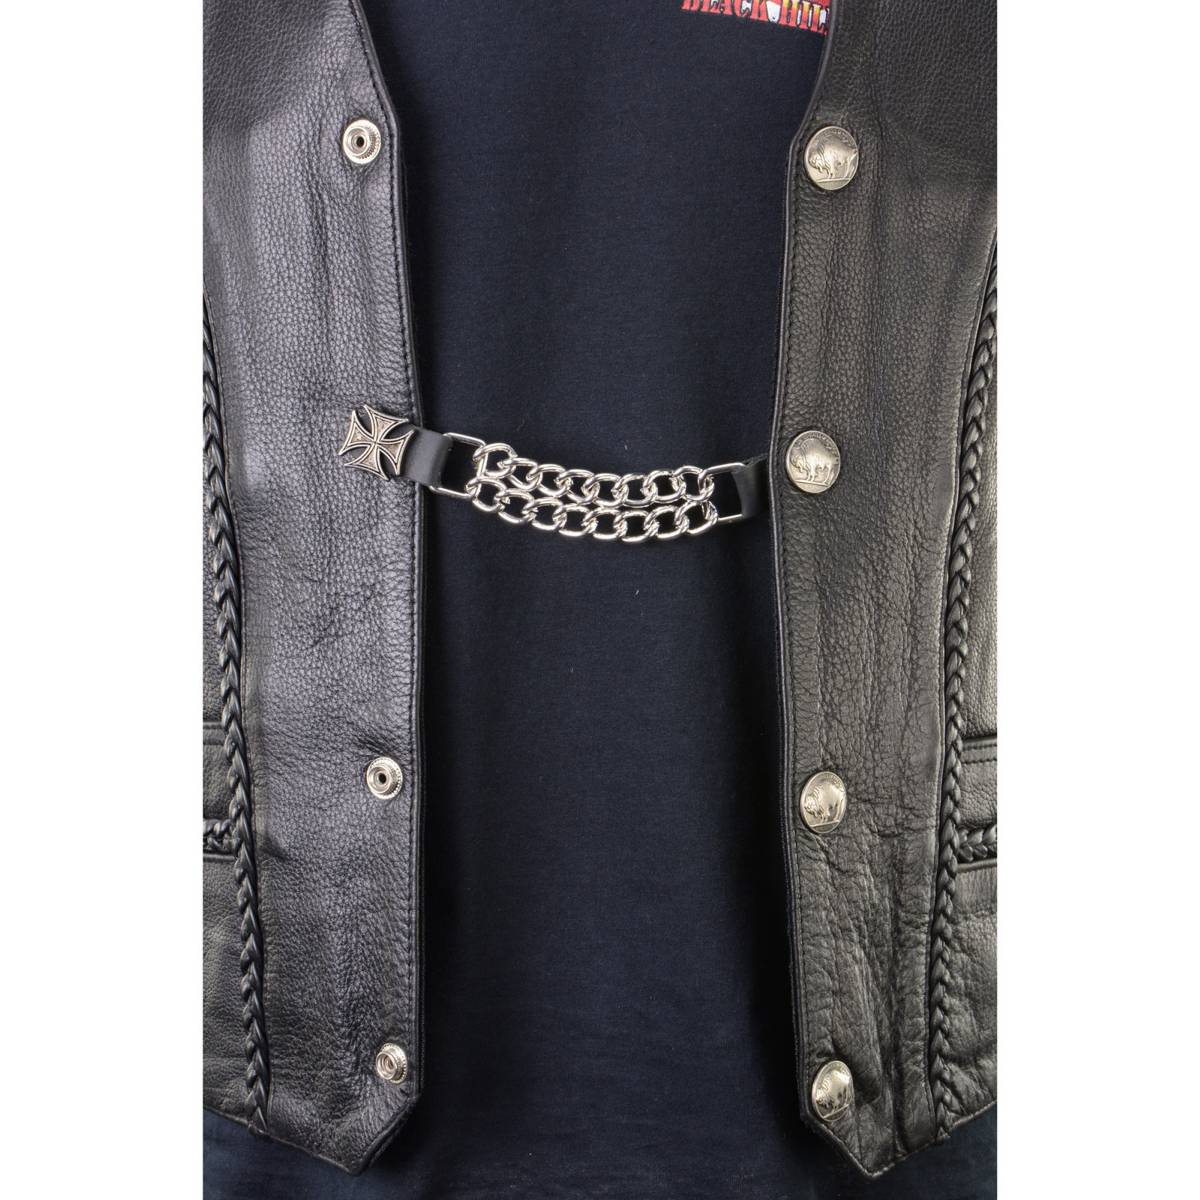 Milwaukee Leather MLA1020-Single Iron Cross Vest Extender Double Chrome Chains w/ Genuine Leather 4" Extension